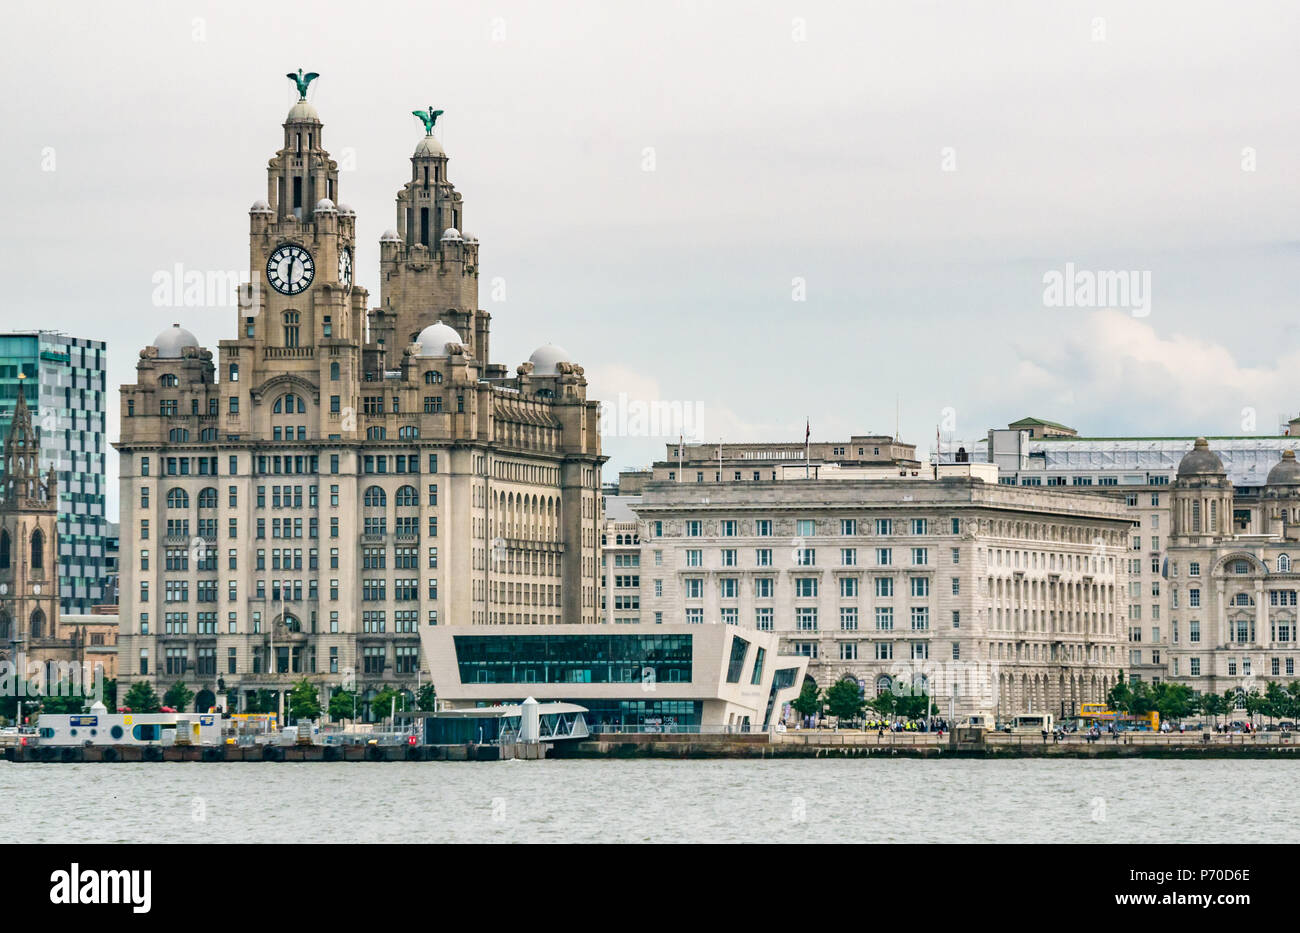 The Three Graces, Port of Liverpool building, Cunard Building, Royal Liver building and modern Museum of Liverpool, Pier Head, Liverpool, England, UK Stock Photo